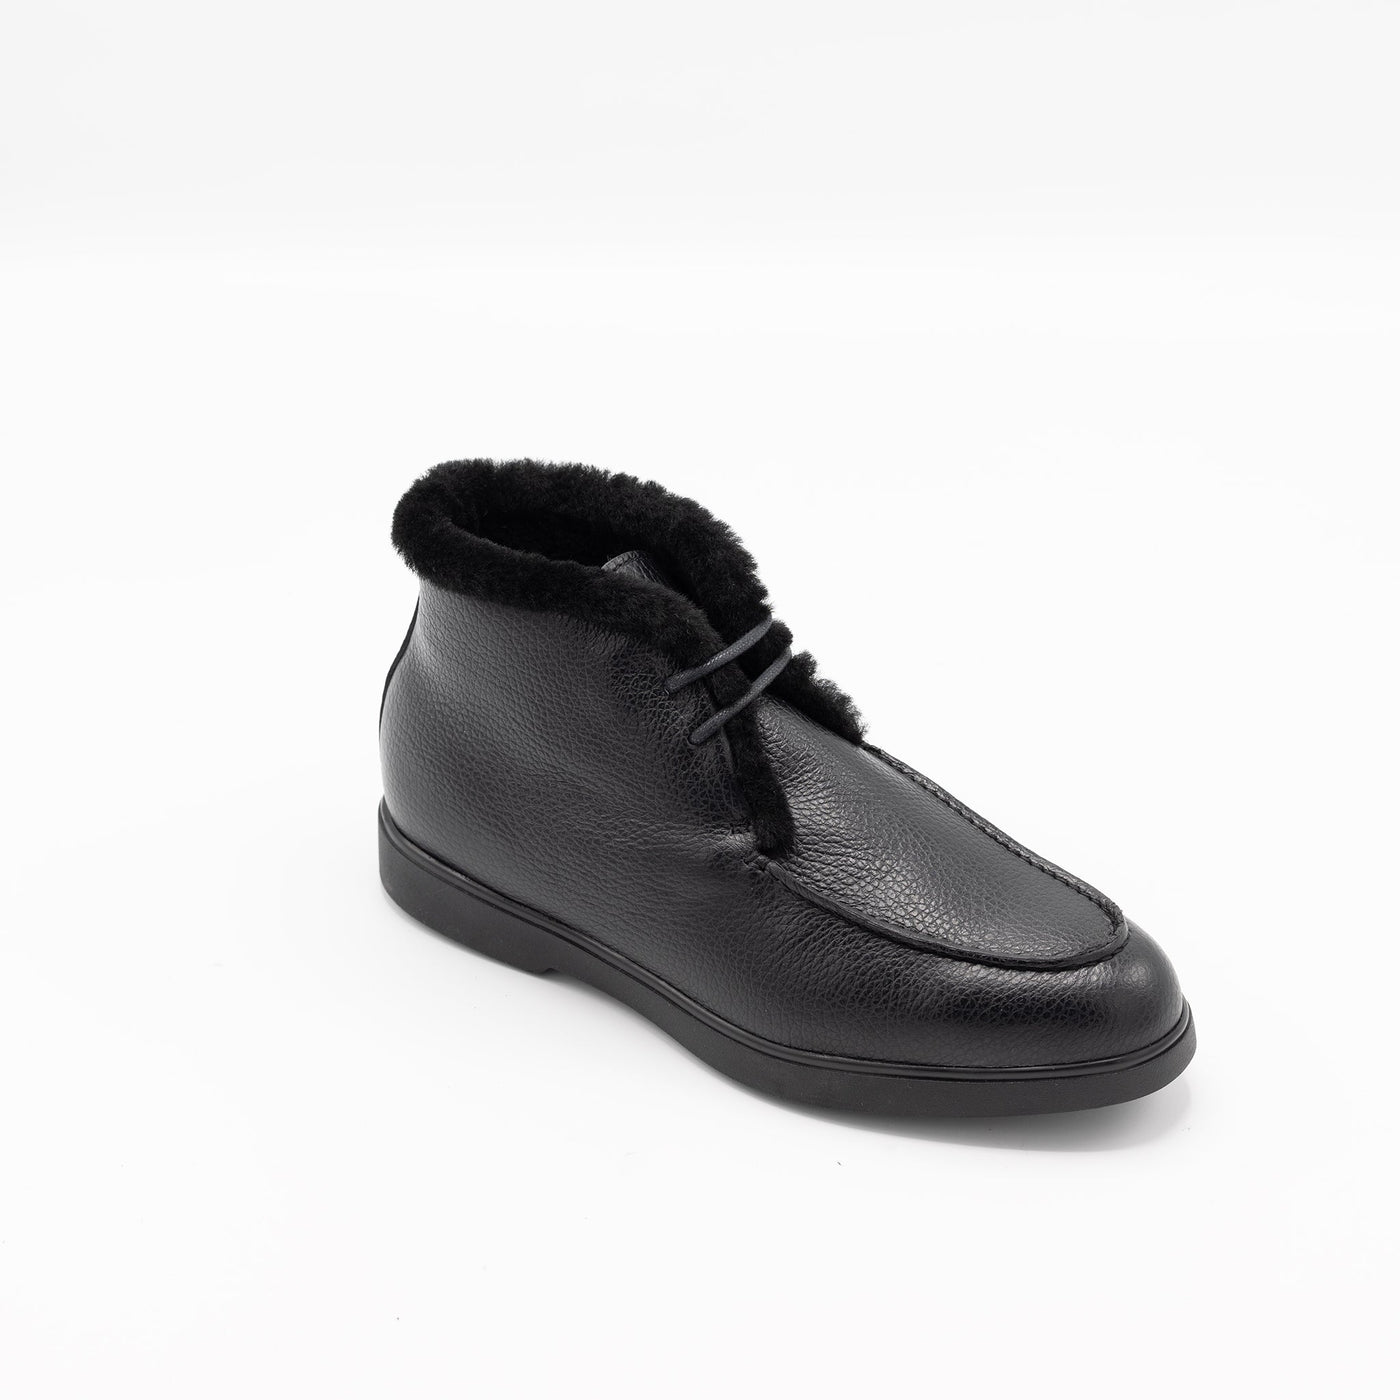 Black Leather Shearling Moccasins